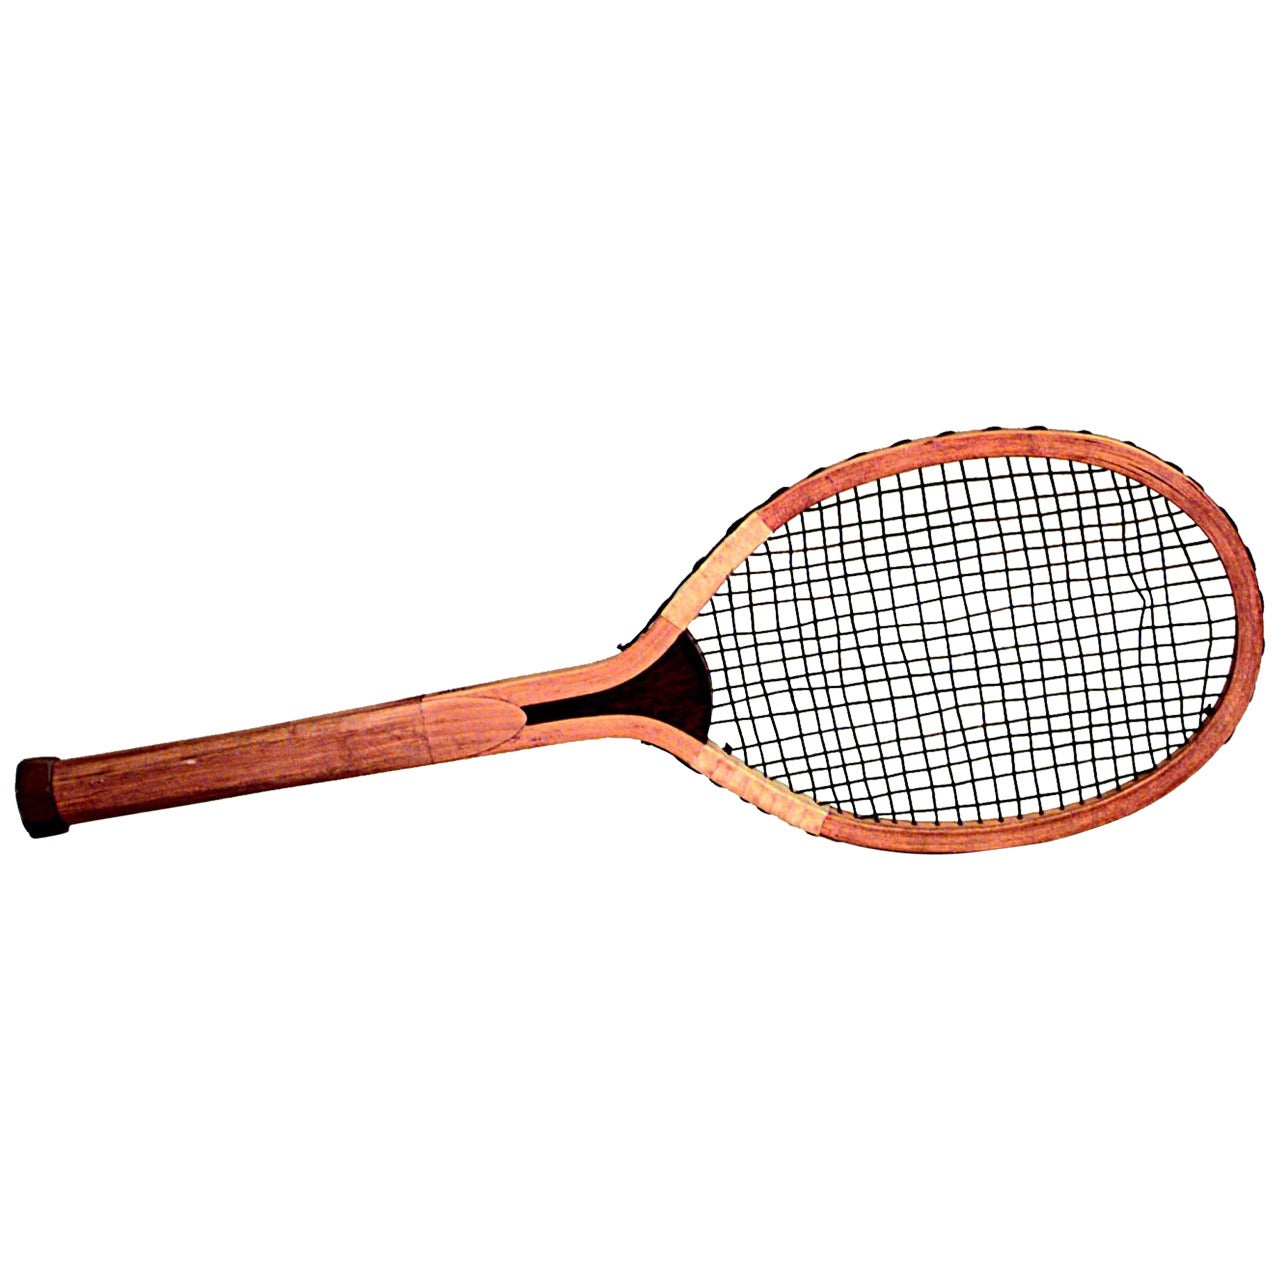 English Oversized Wooden Tennis Racket Wall Plaque